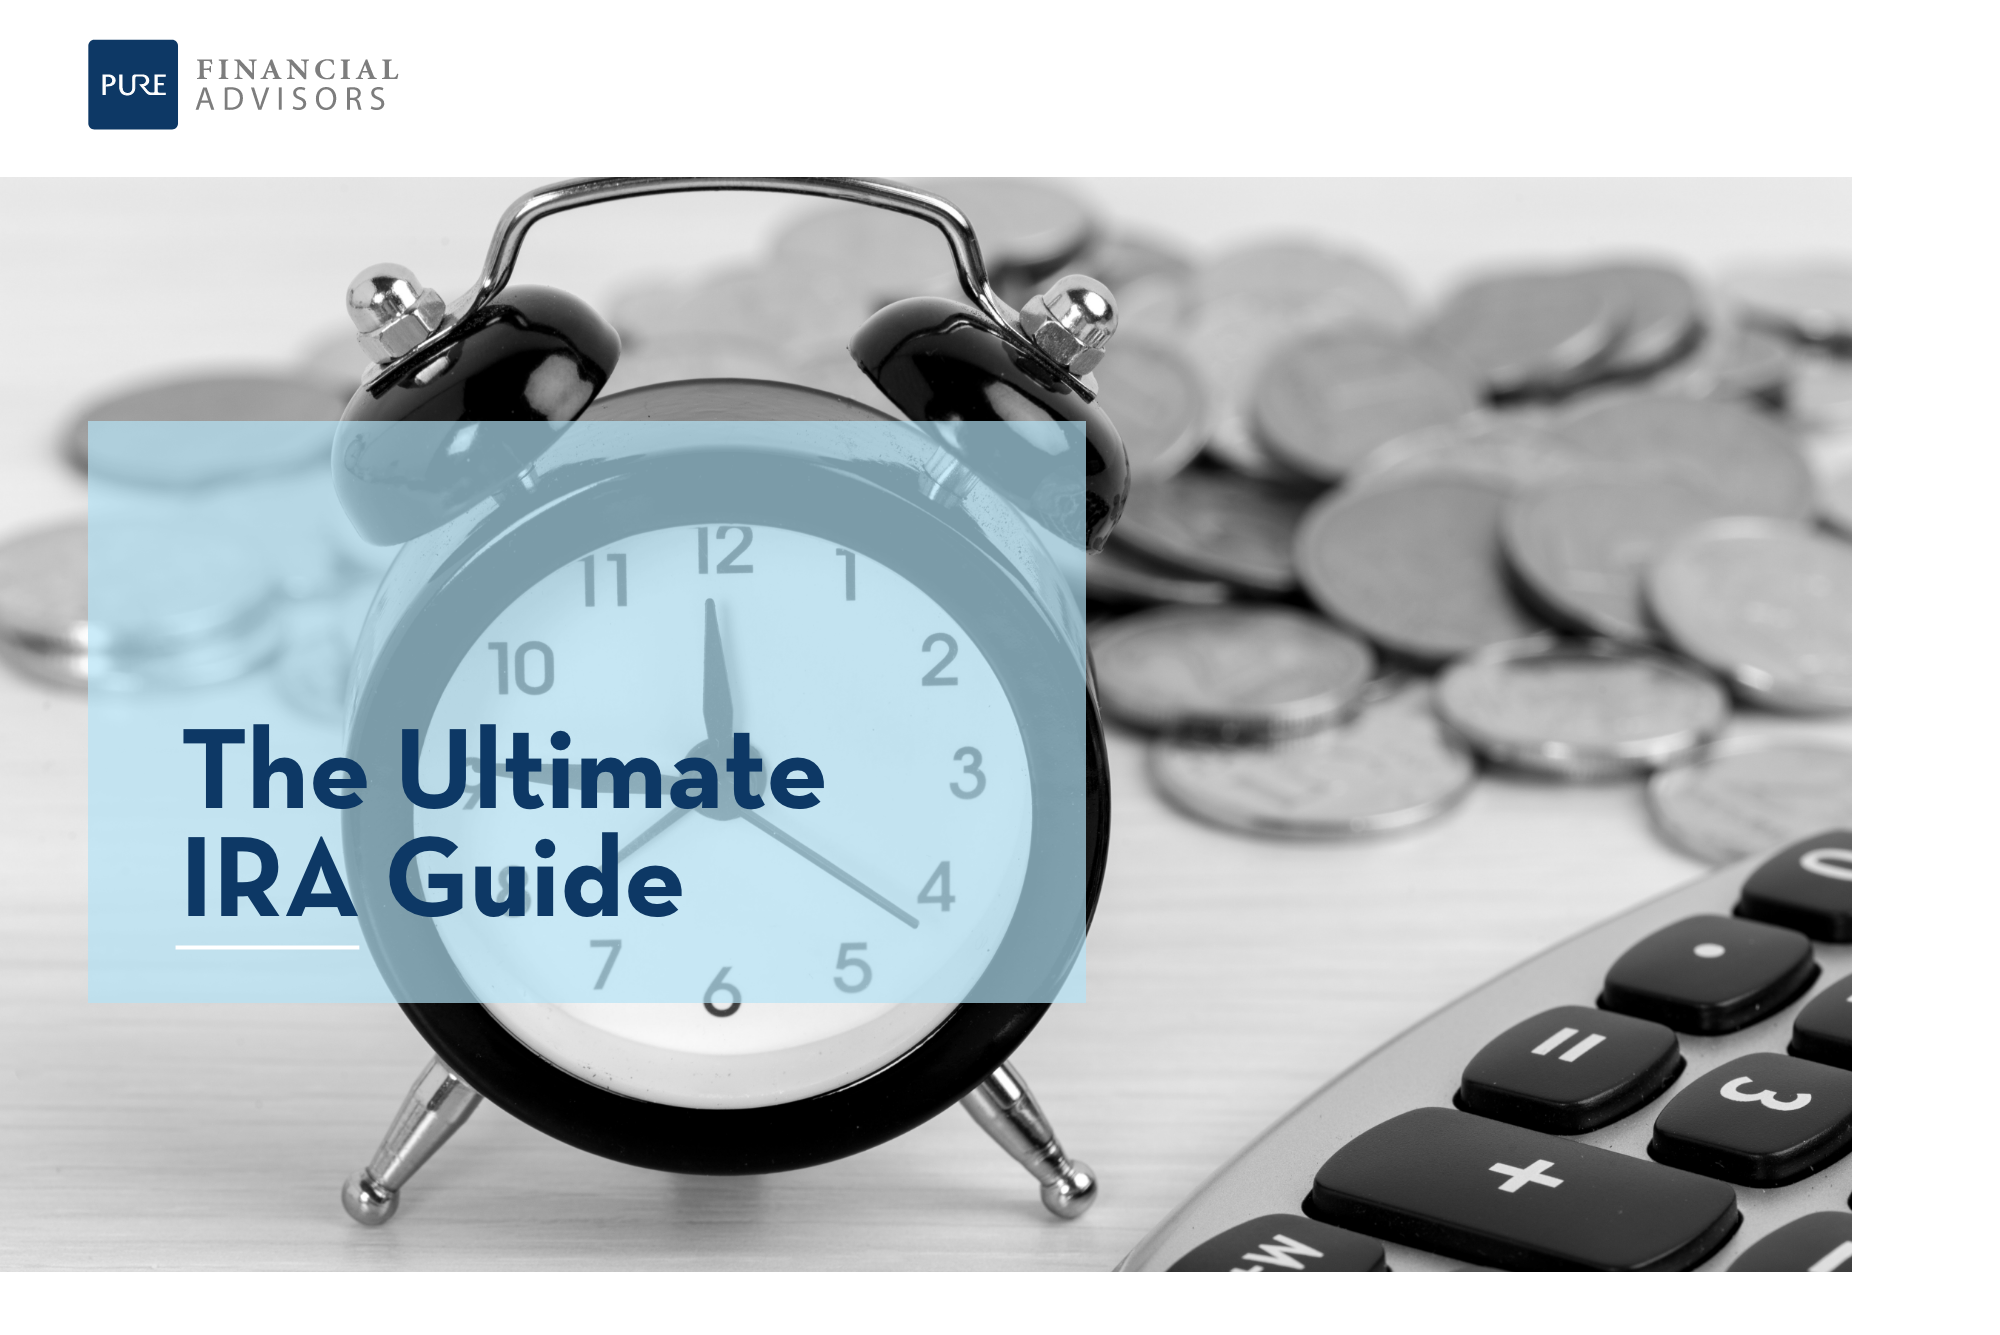 Download the Ultimate IRA Guide